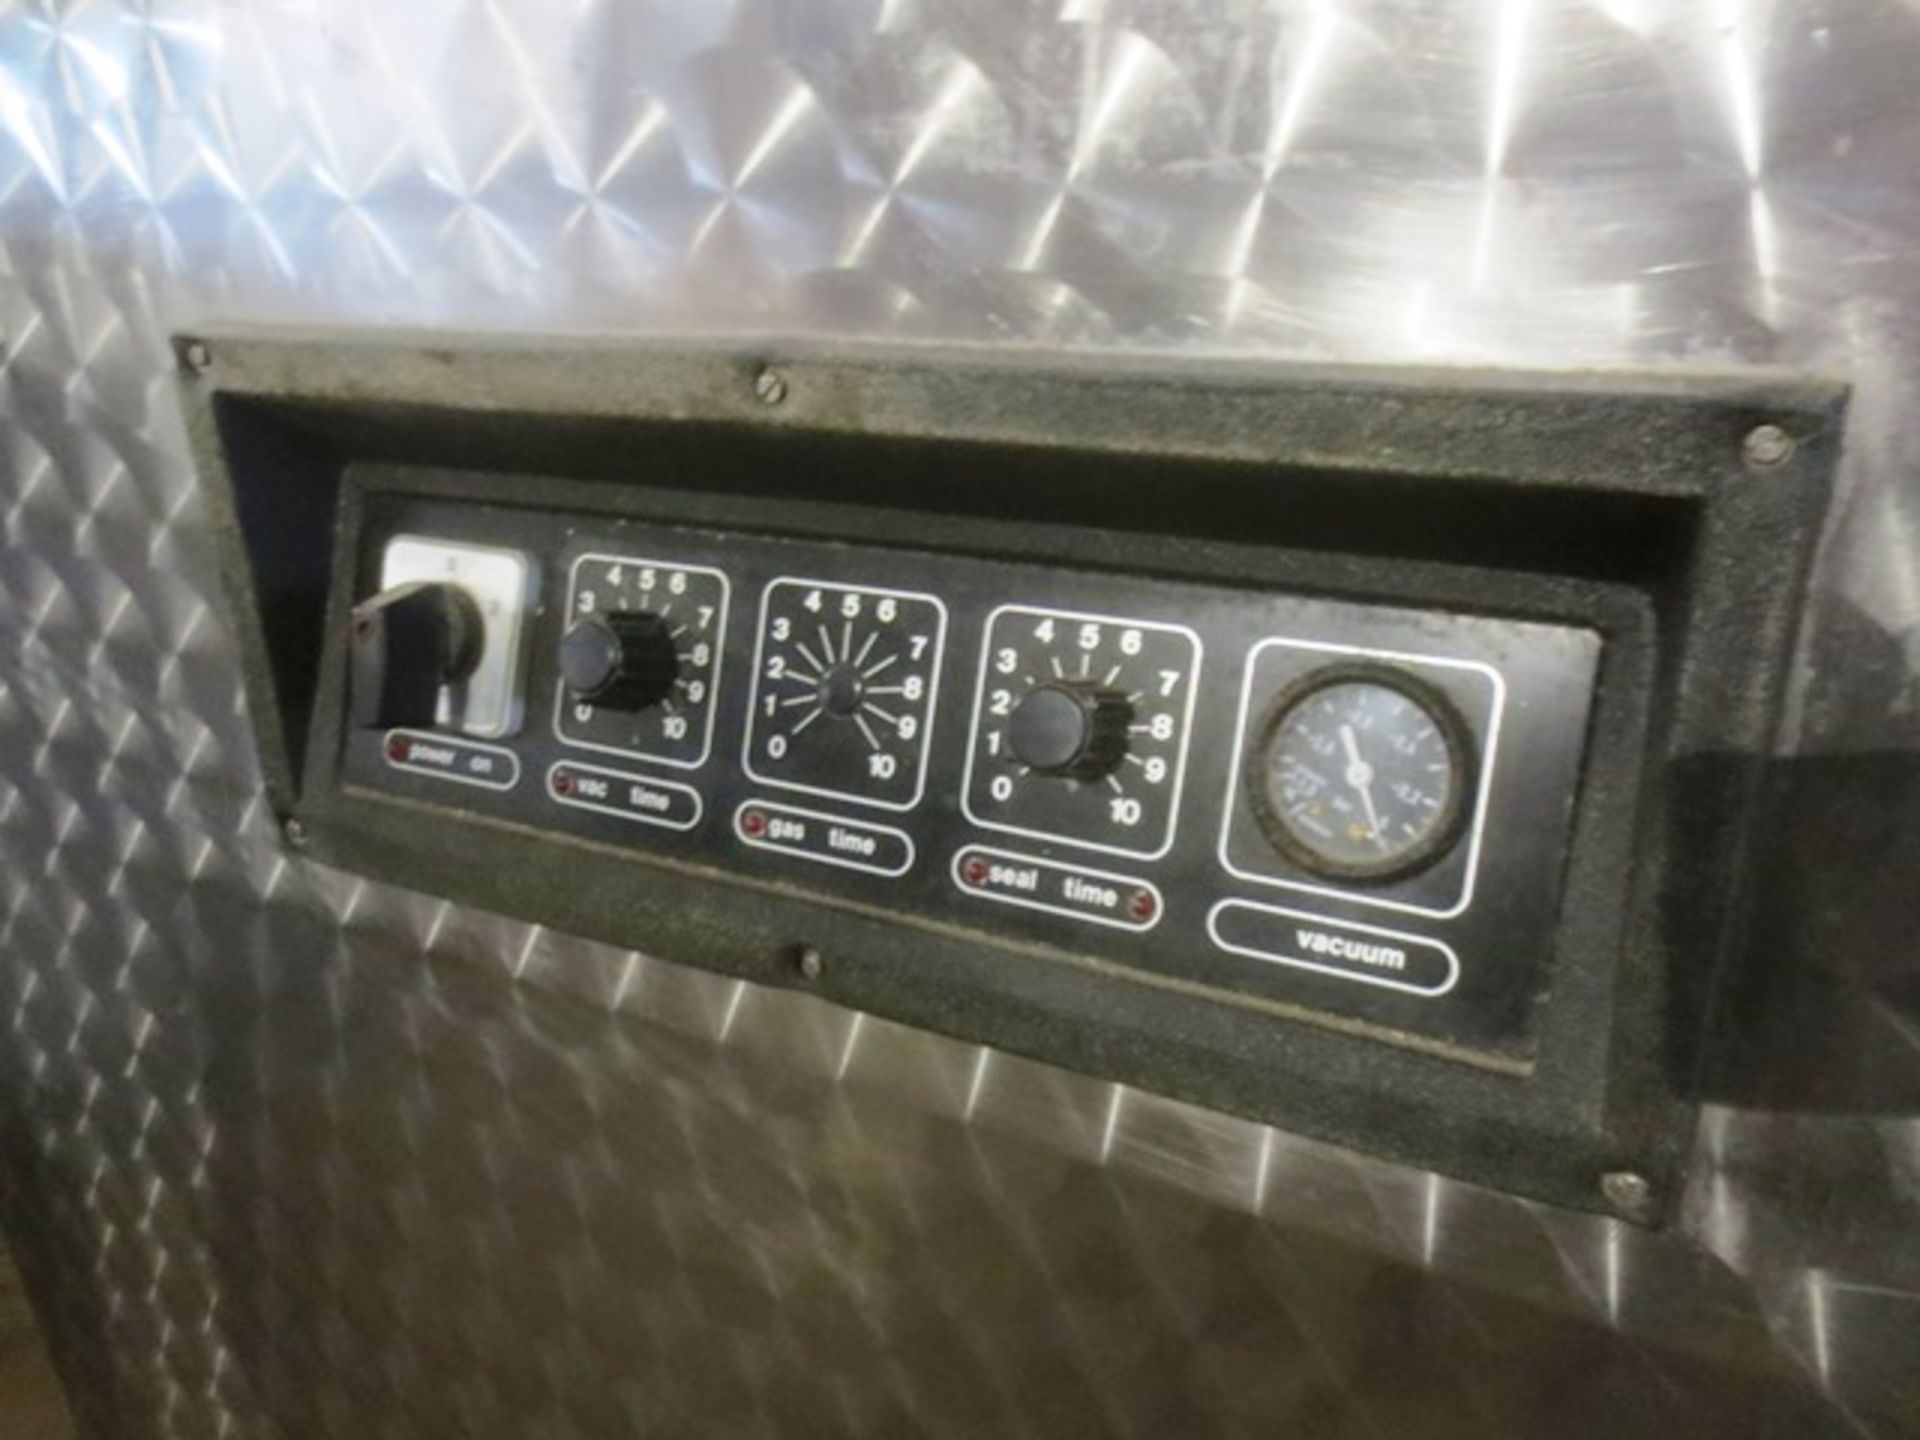 Turbovac SB800A vacuum packer, serial no: 89108129, 240v (please note: seals require attention) - Image 3 of 3